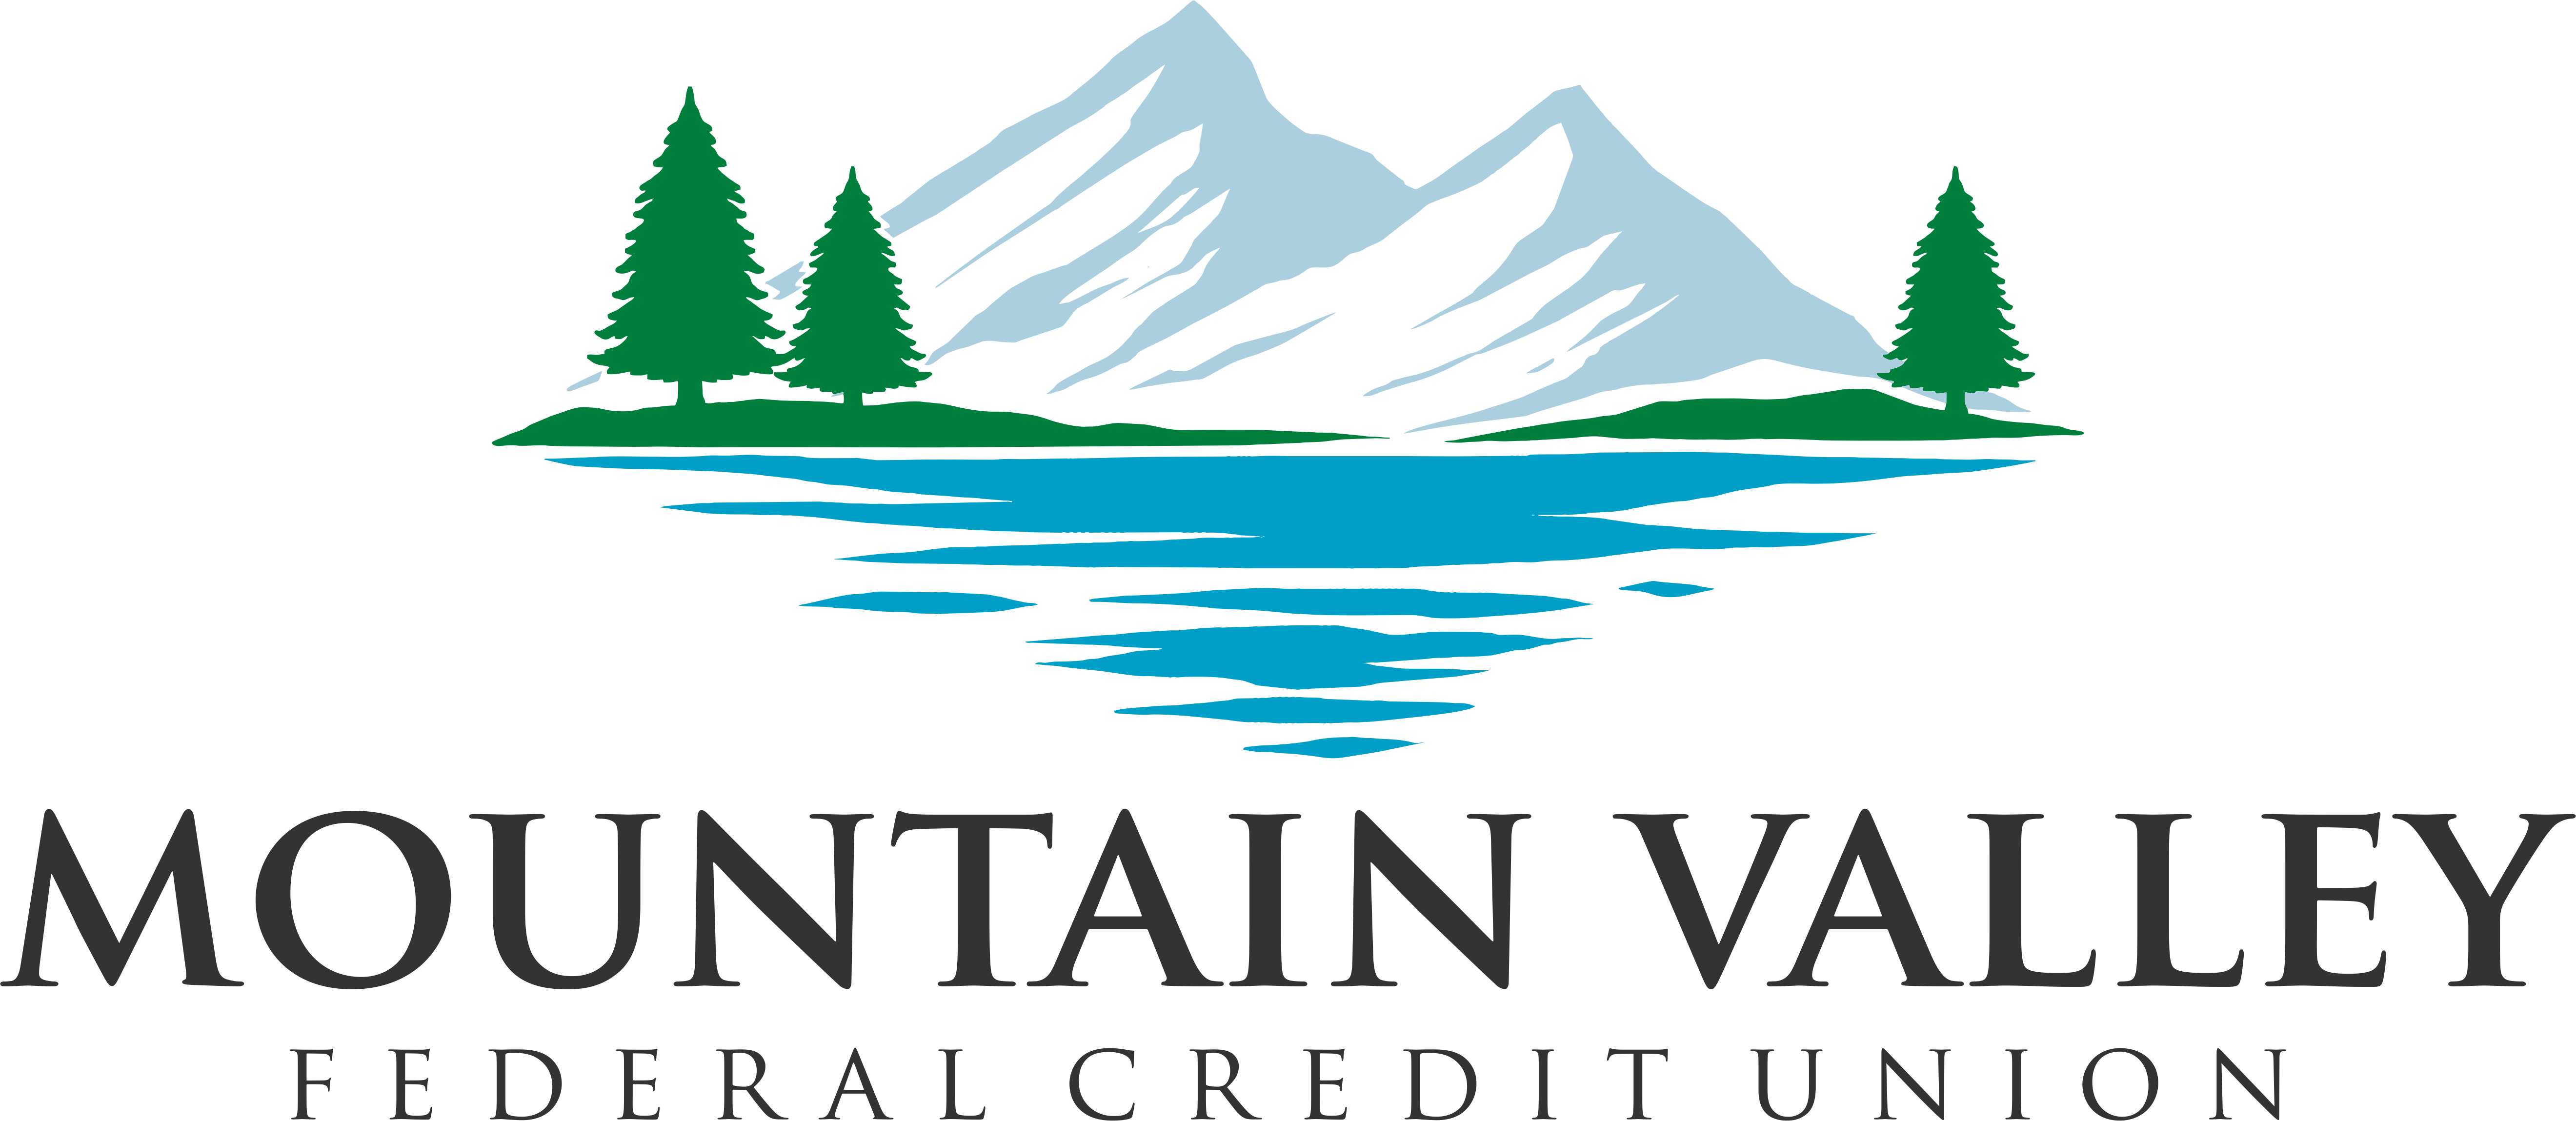 Mountain Valley Federal Credit Union Website logo